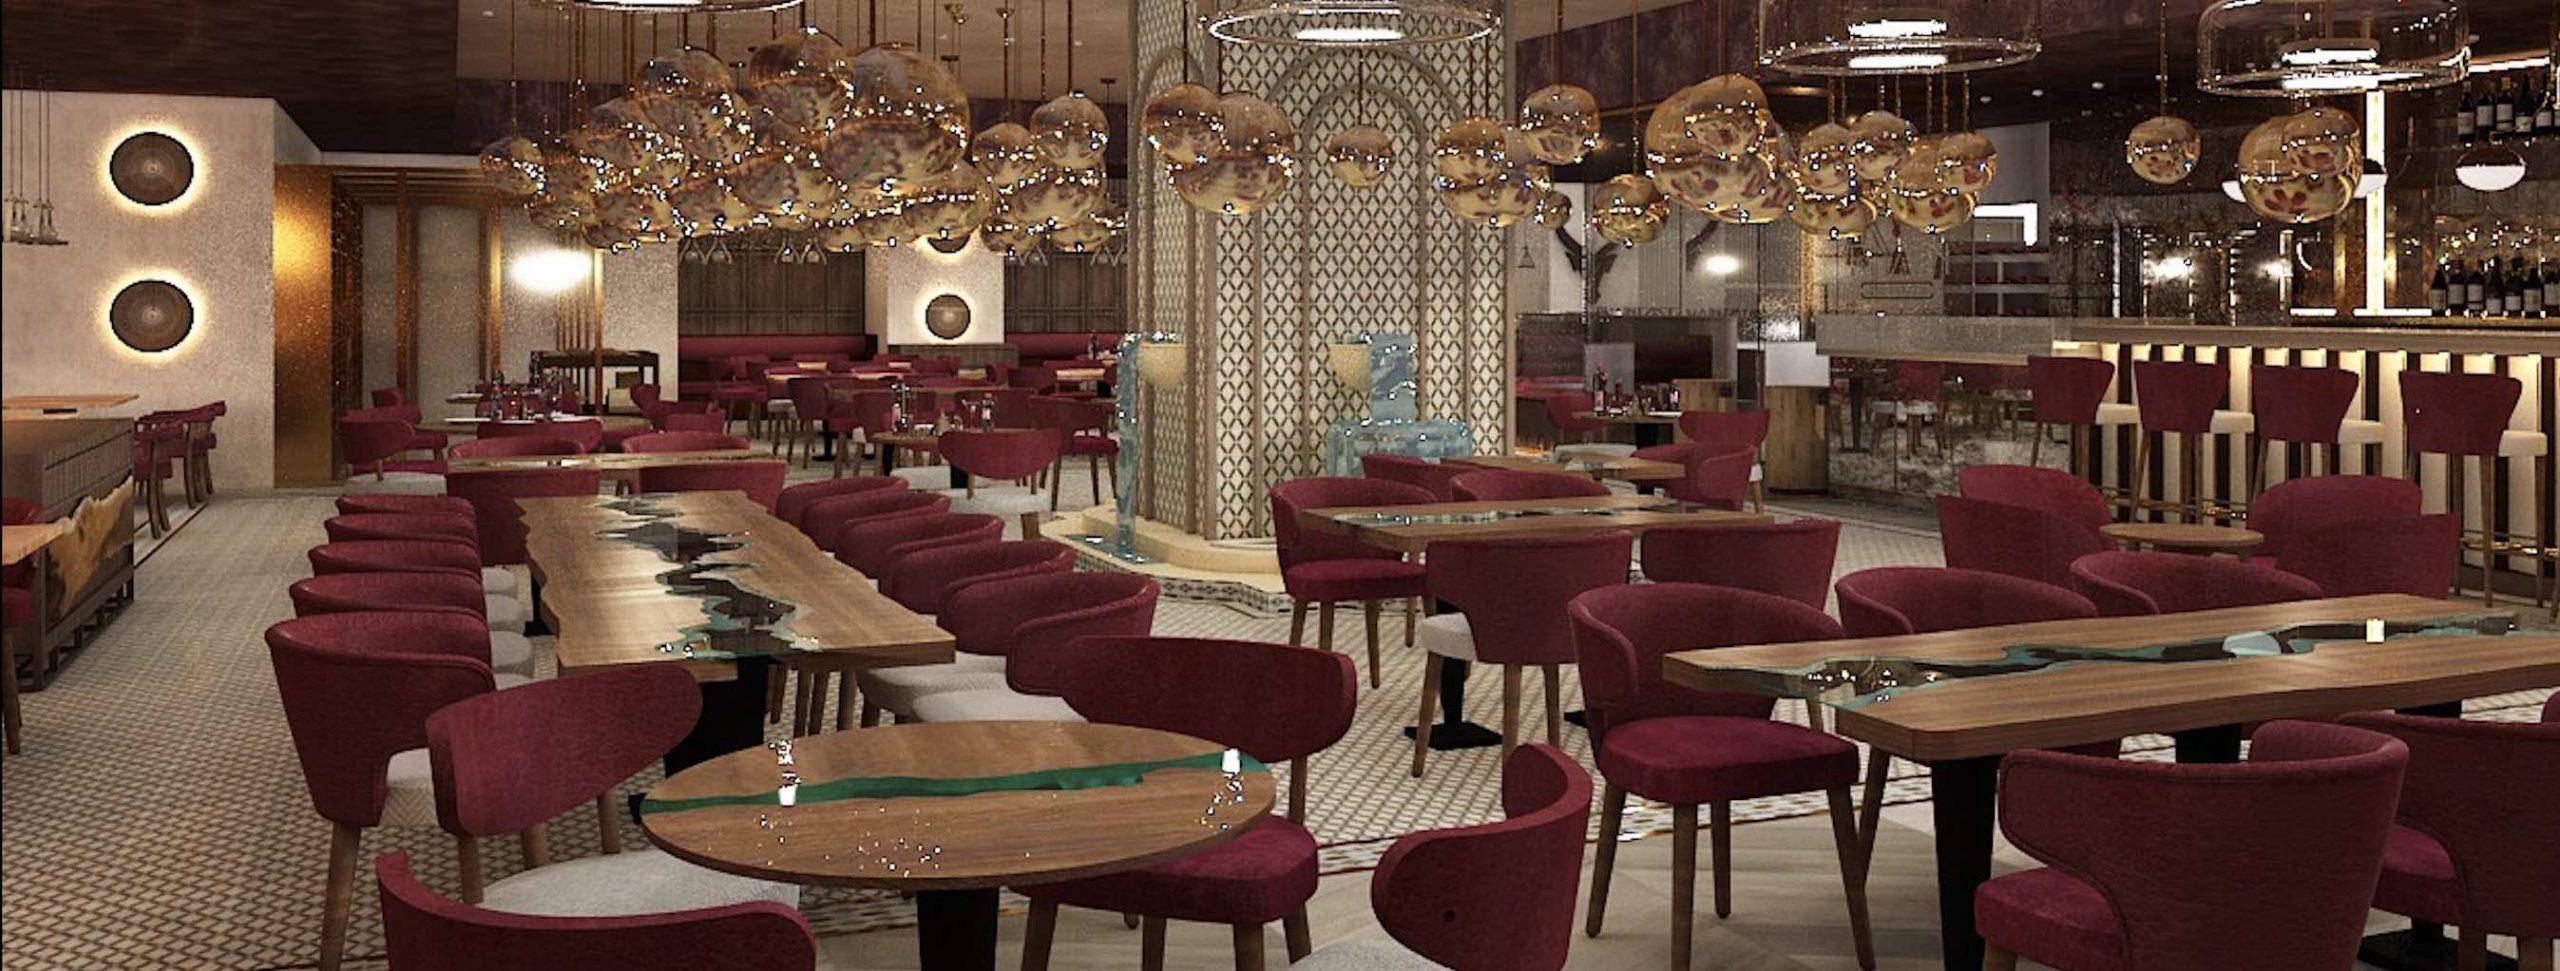 A new steakhouse will open inside Conrad Dubai this August